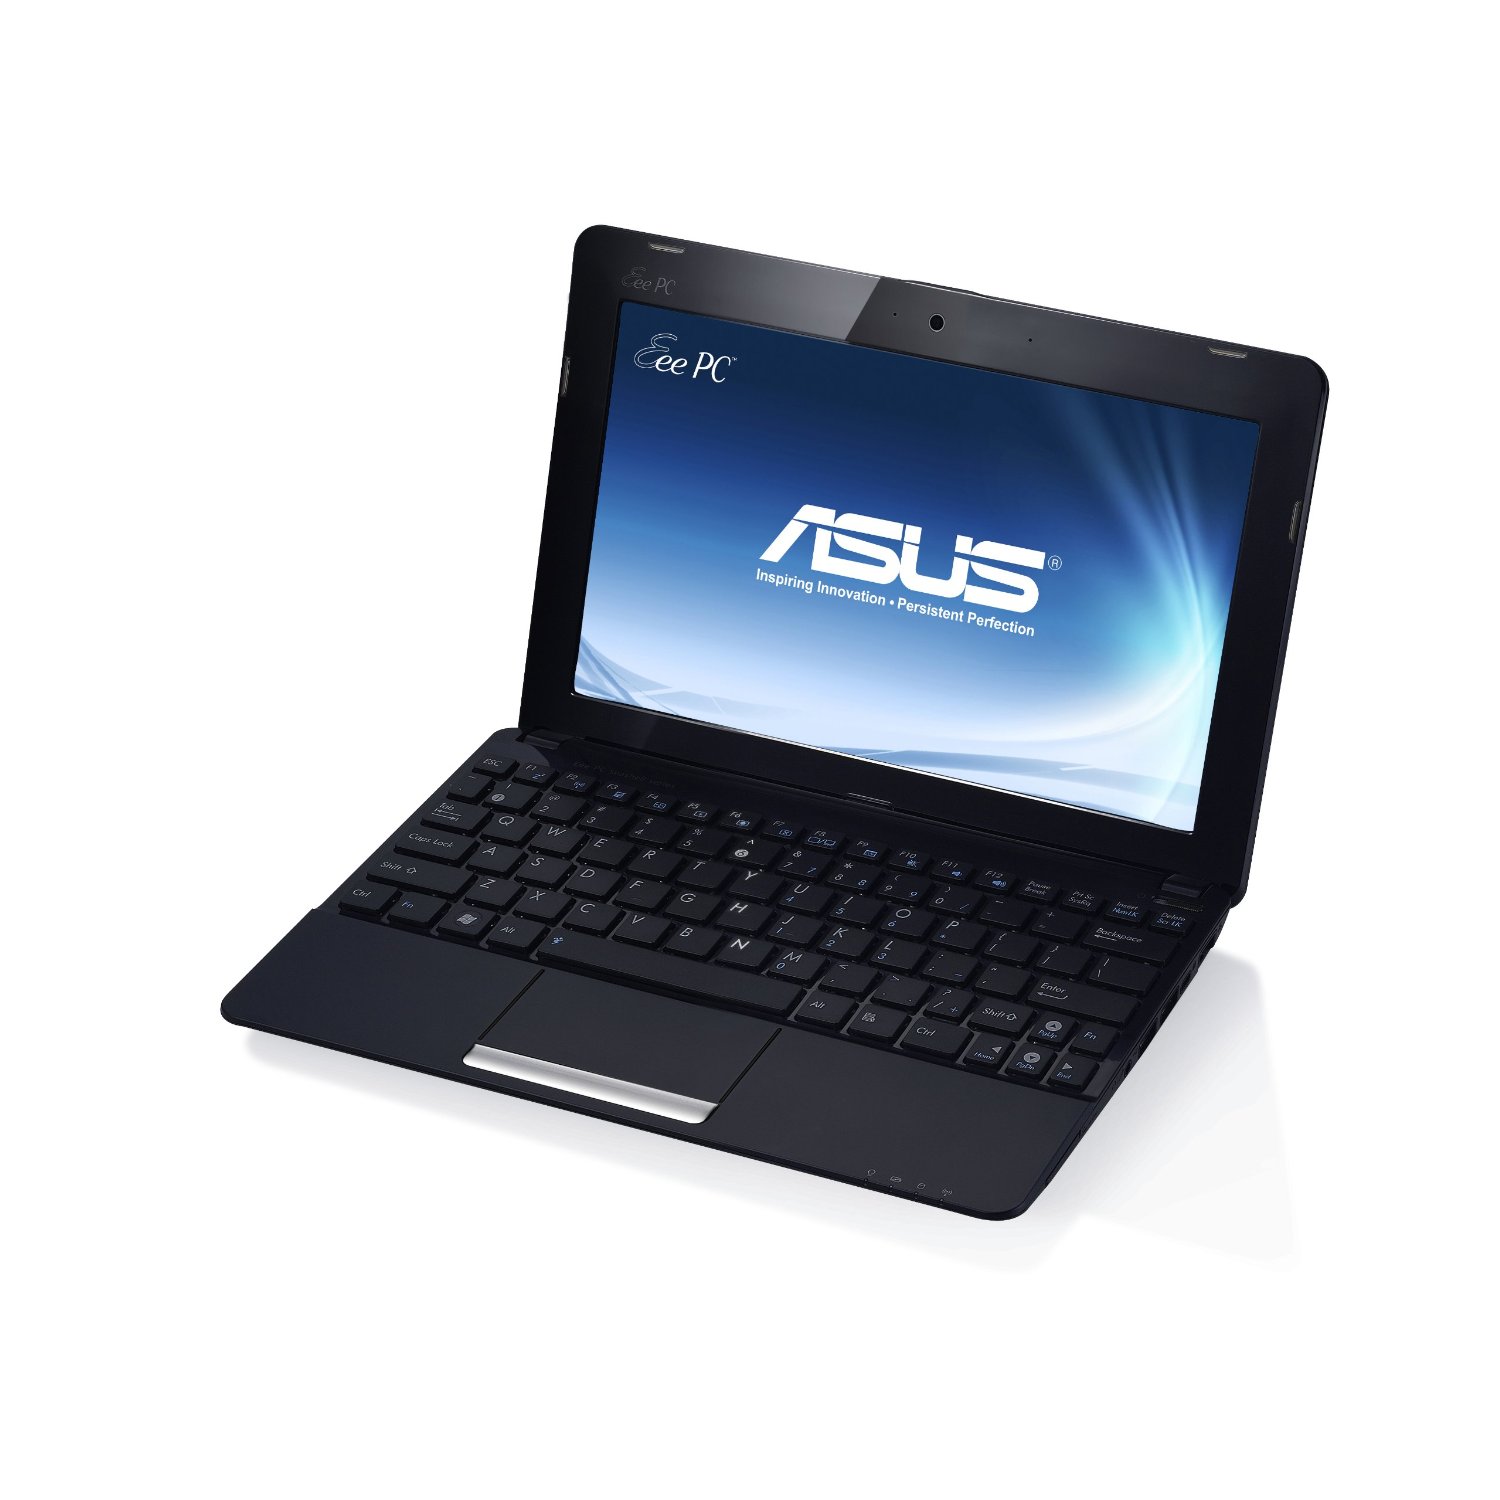 http://thetechjournal.com/wp-content/uploads/images/1112/1322737303-asus-eee-pc-1015pxsu17bk-101inch-netbook-1.jpg